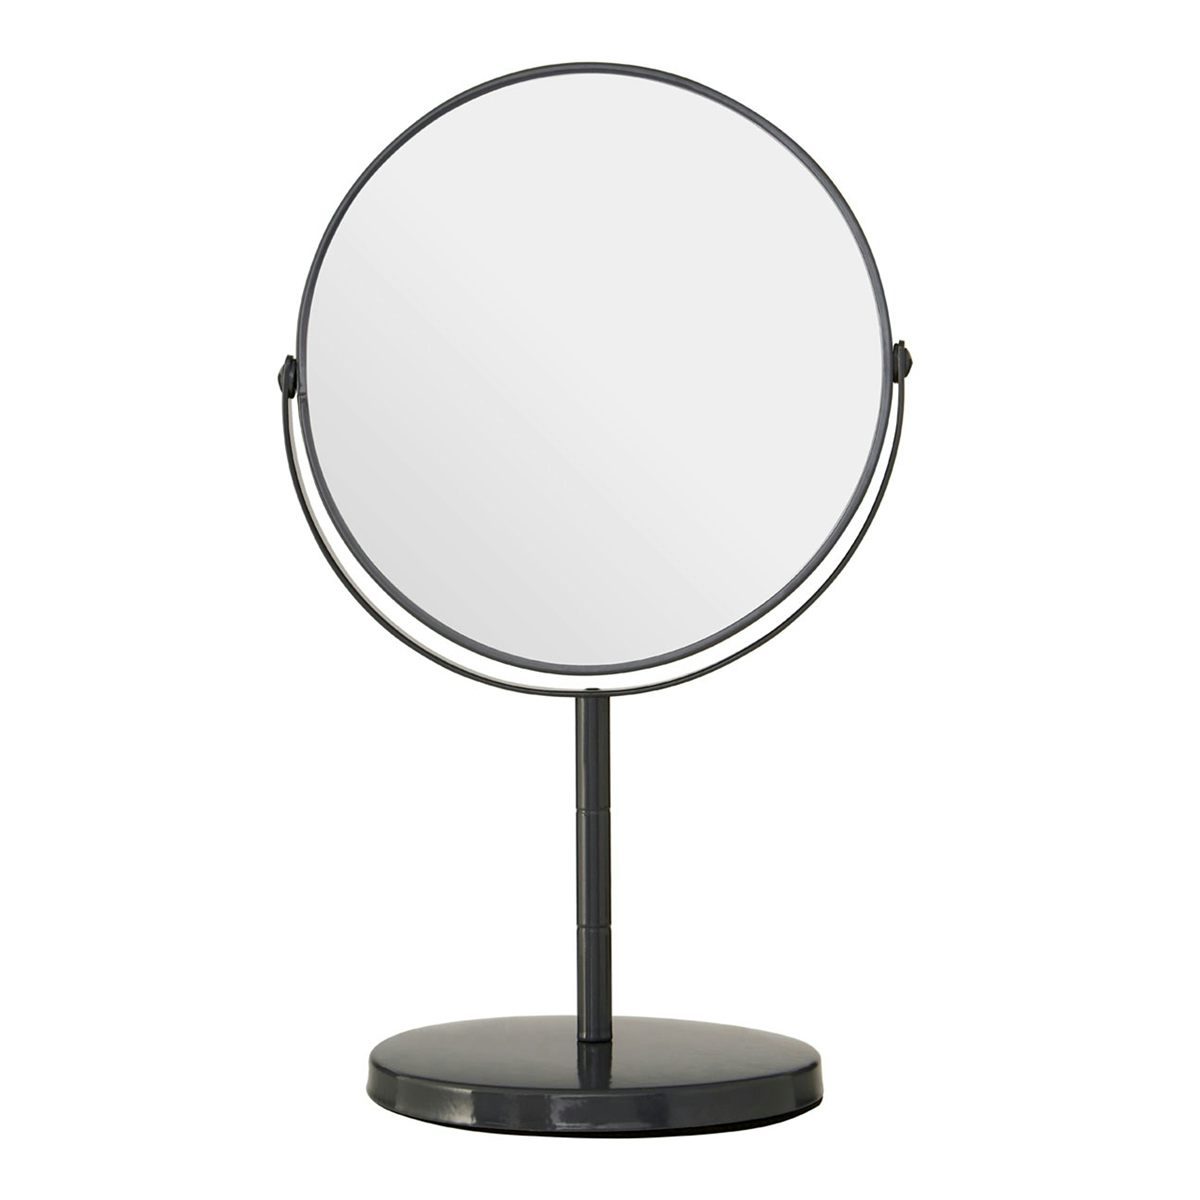 Accents Grey large freestanding vanity mirror with 2x magnification